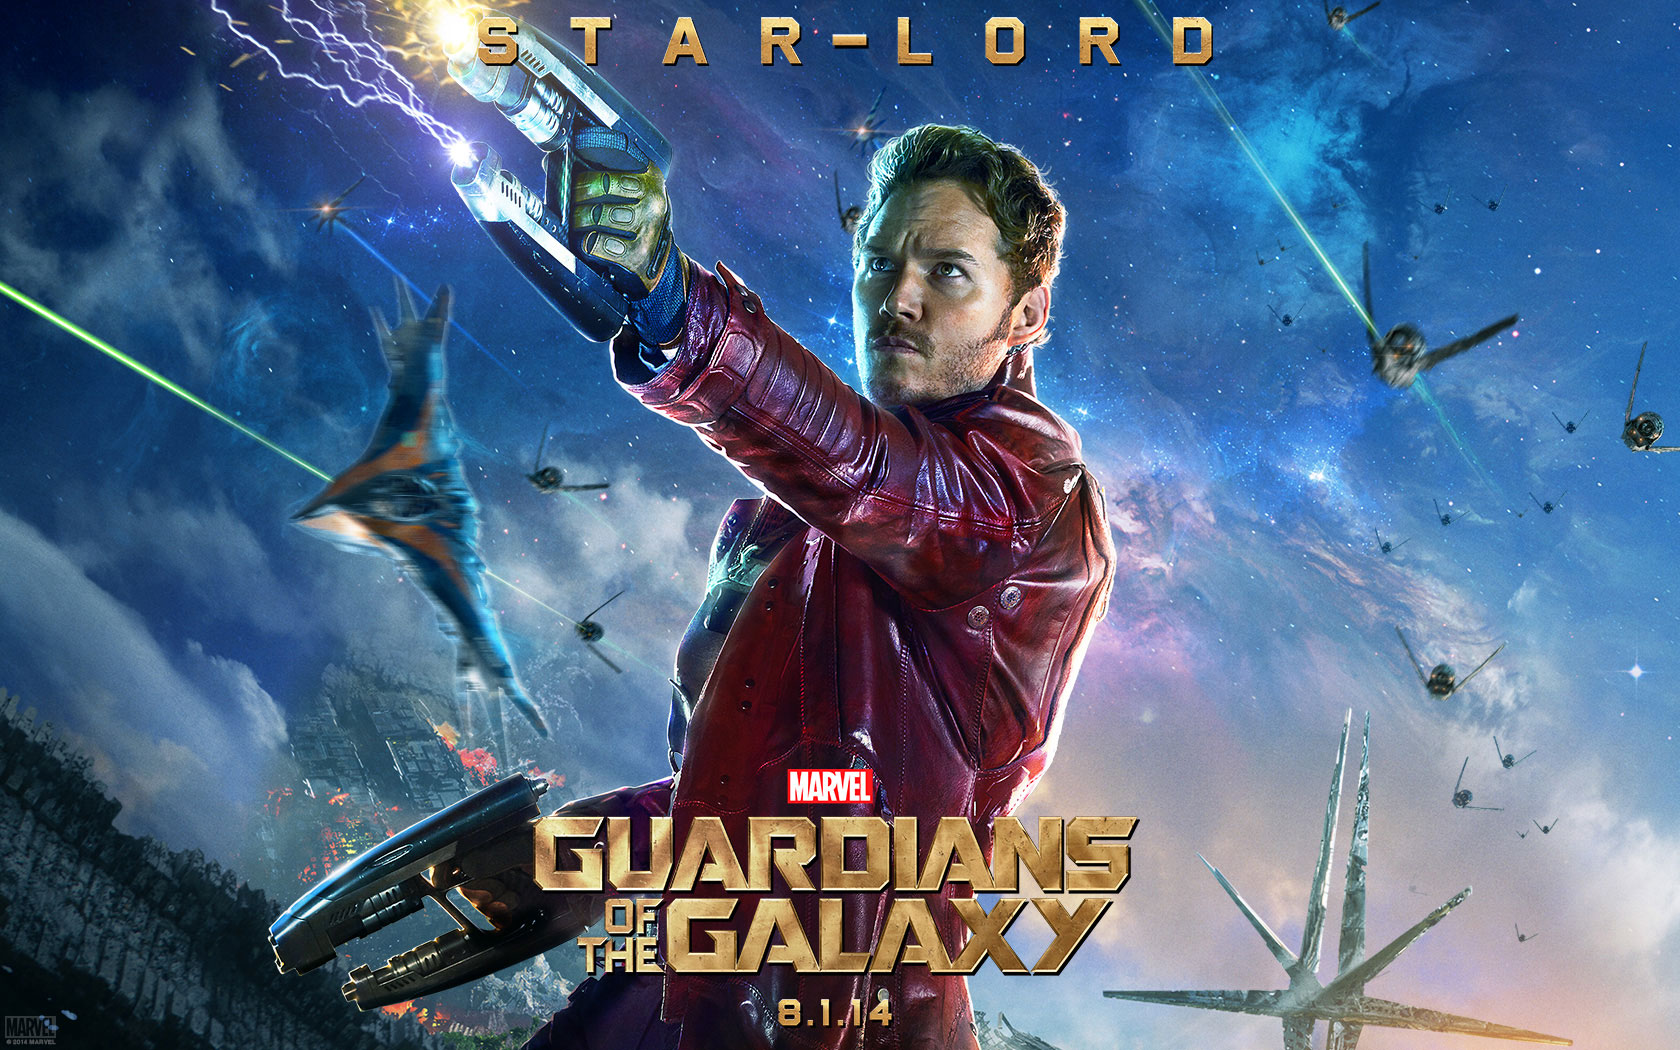 People 1680x1050 Star-Lord Guardians of the Galaxy Marvel Comics movies movie poster Marvel Cinematic Universe science fiction 2014 (Year) men